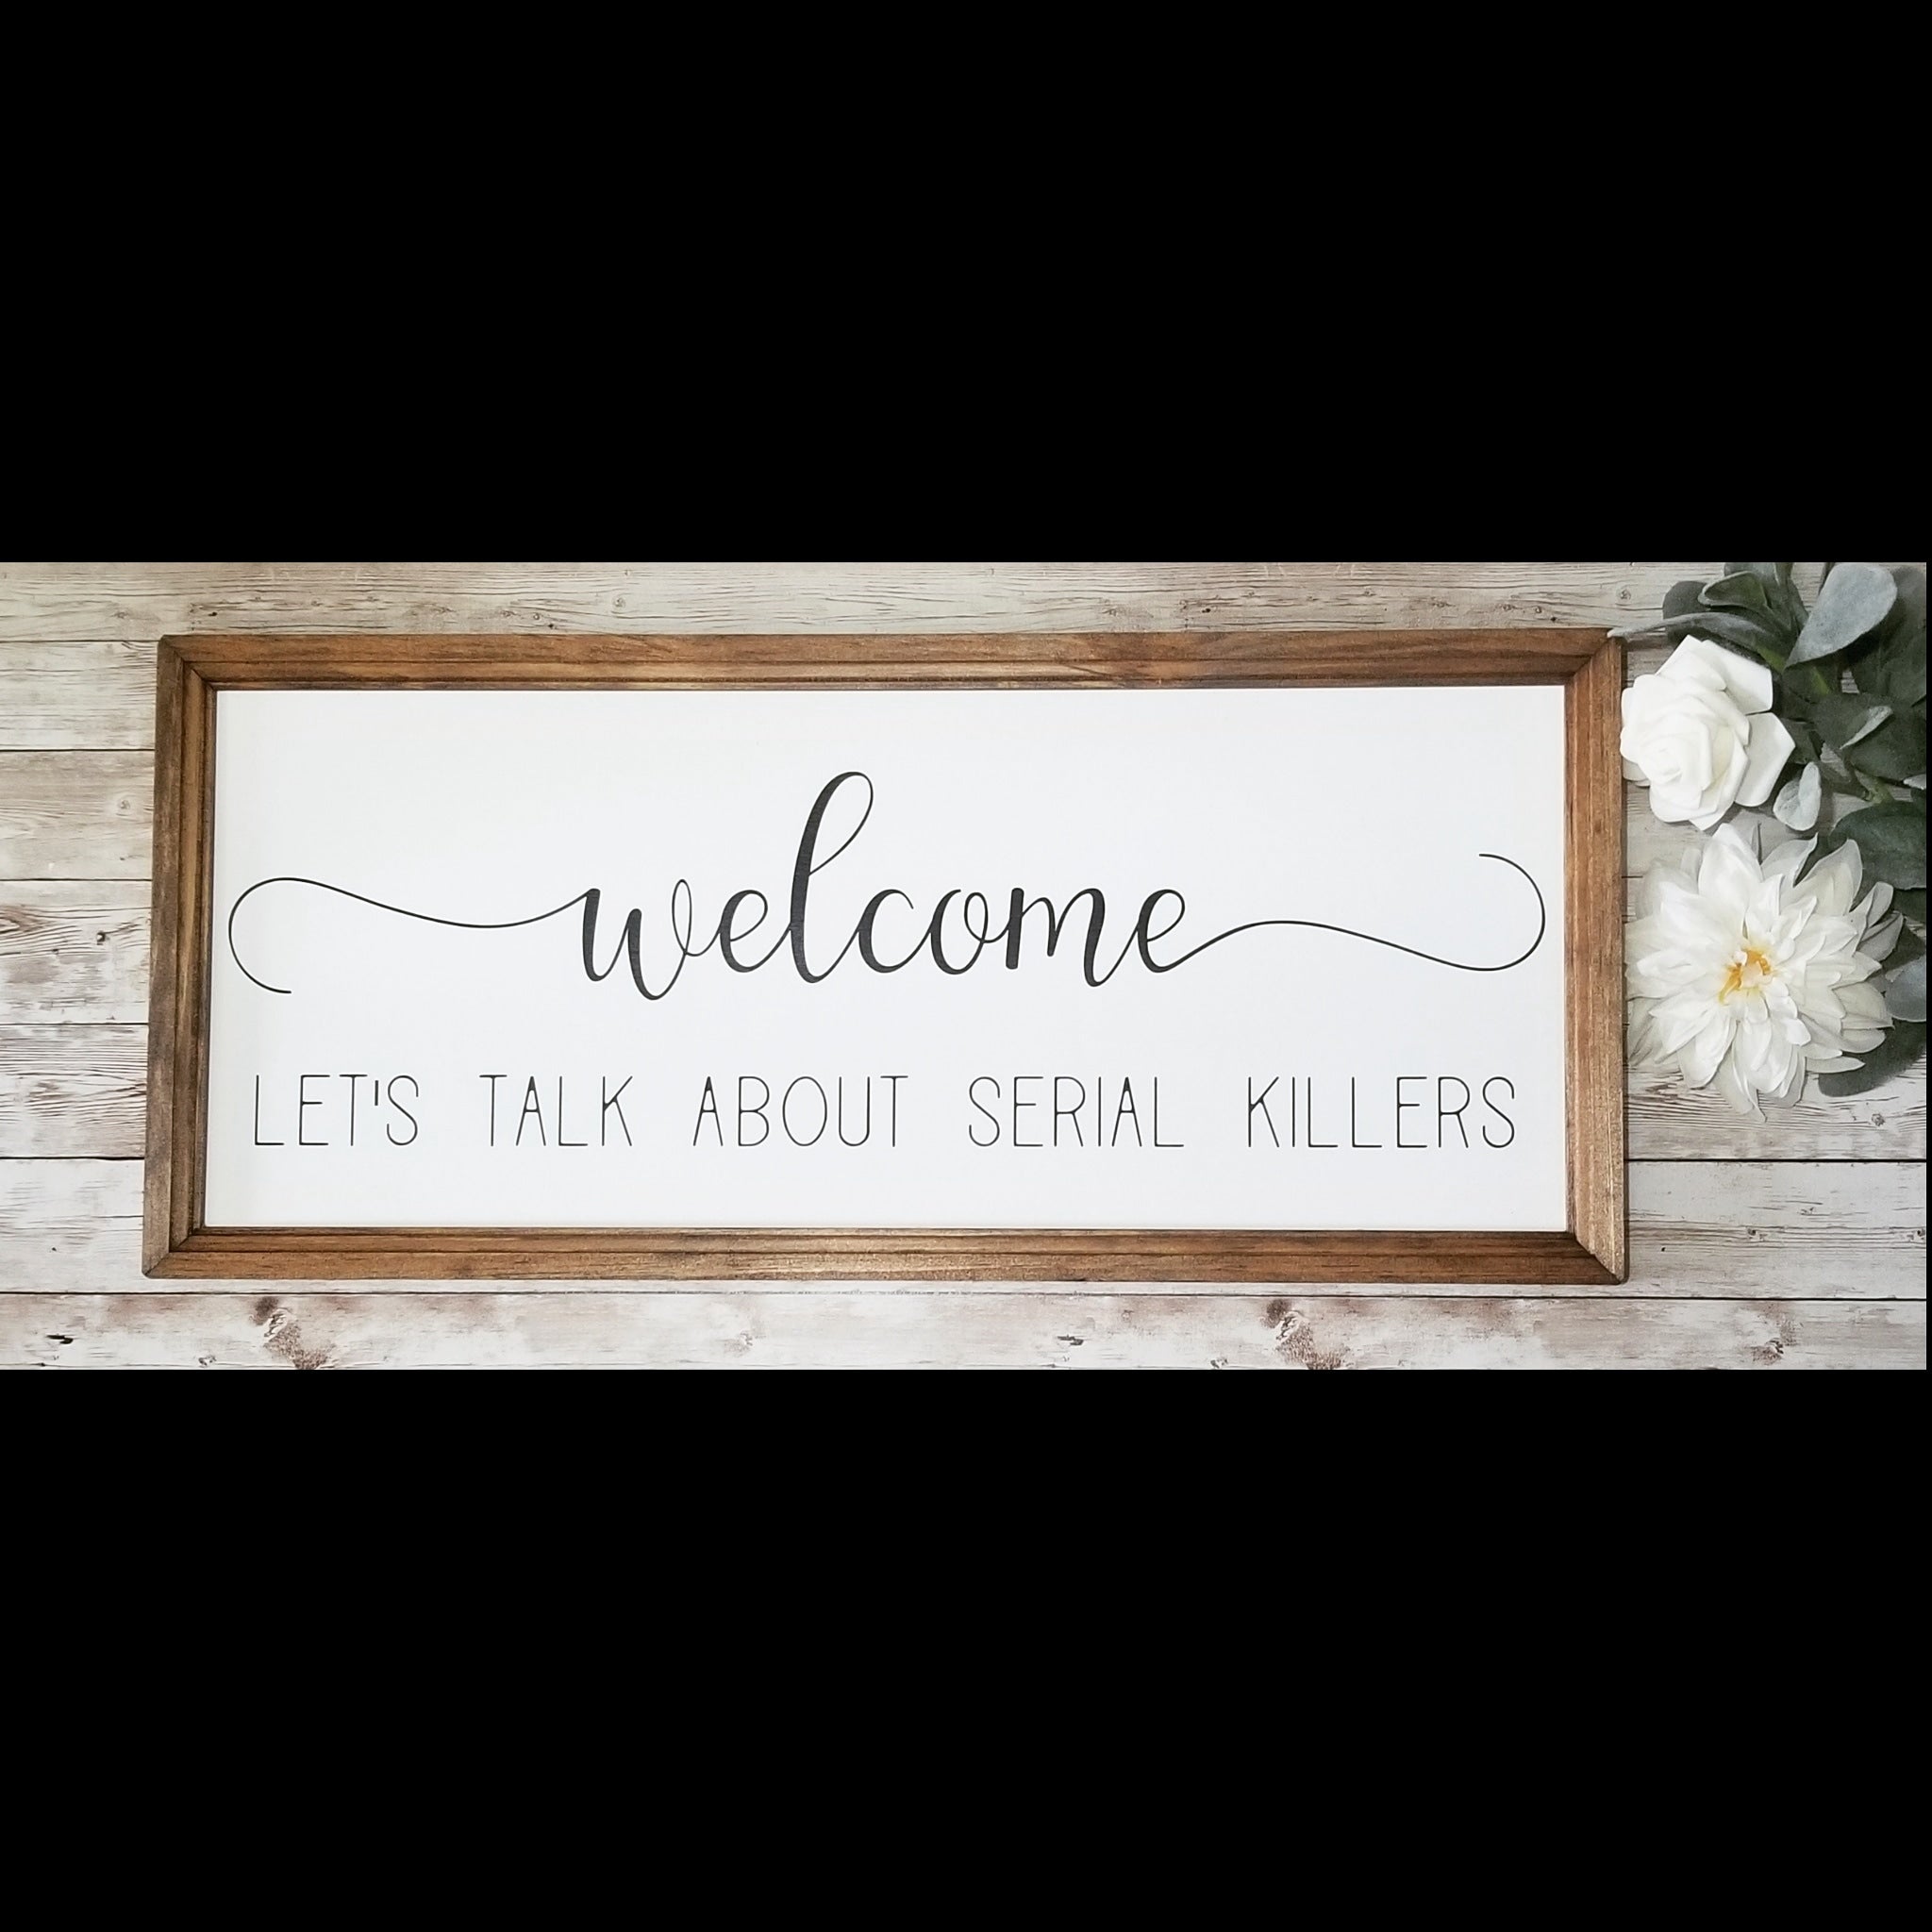 Welcome let's talk about serial killers sign